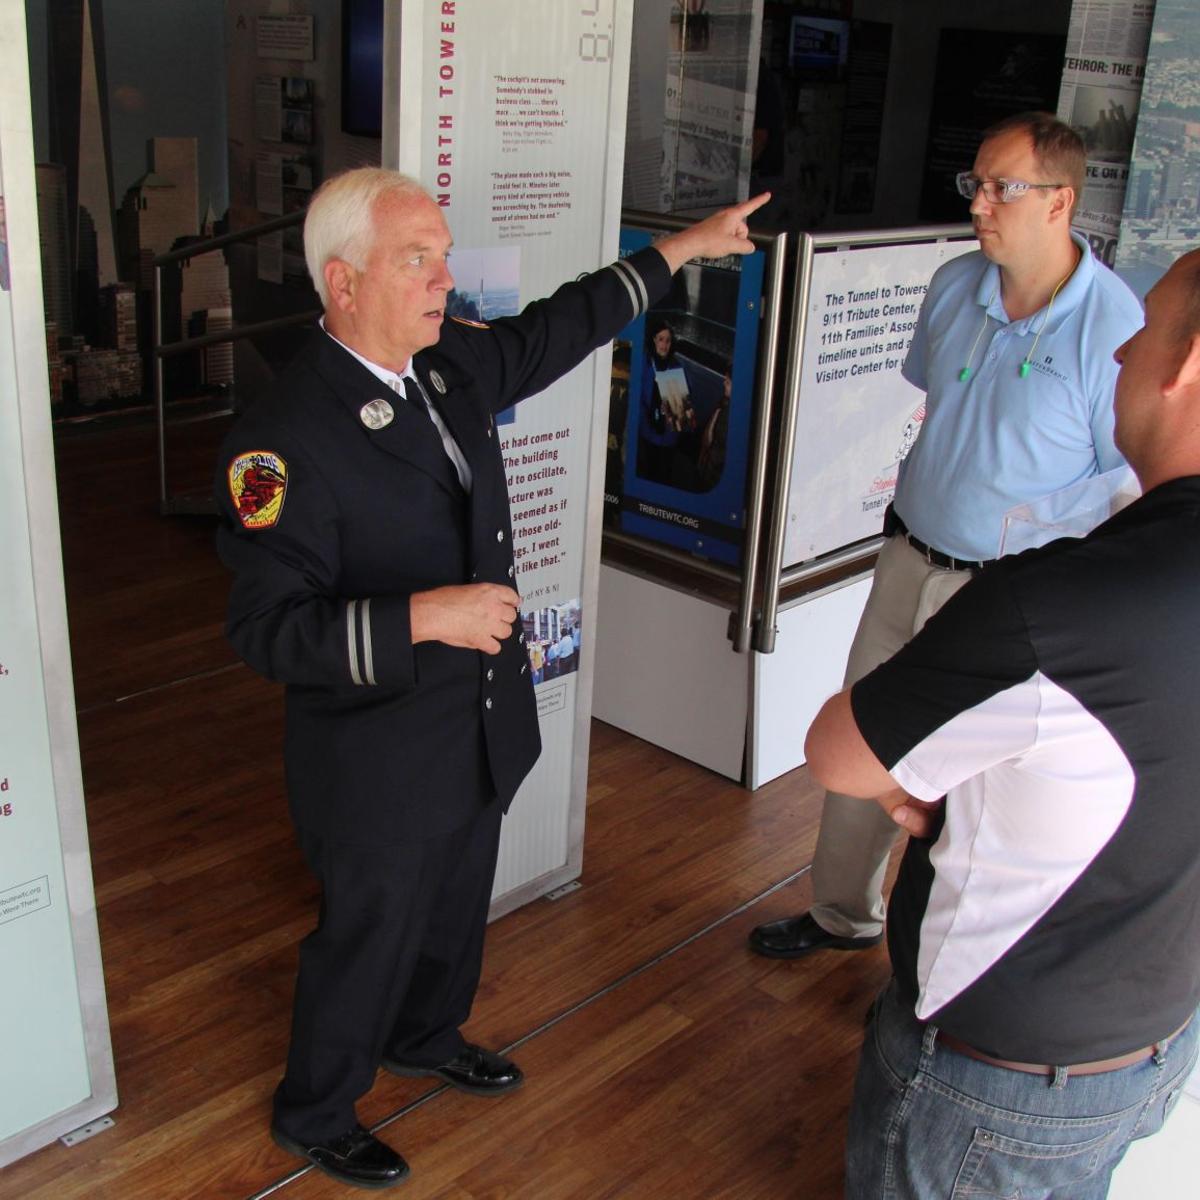 9 11 Exhibit Stops By Omega Cabinetry Local News Wcfcourier Com